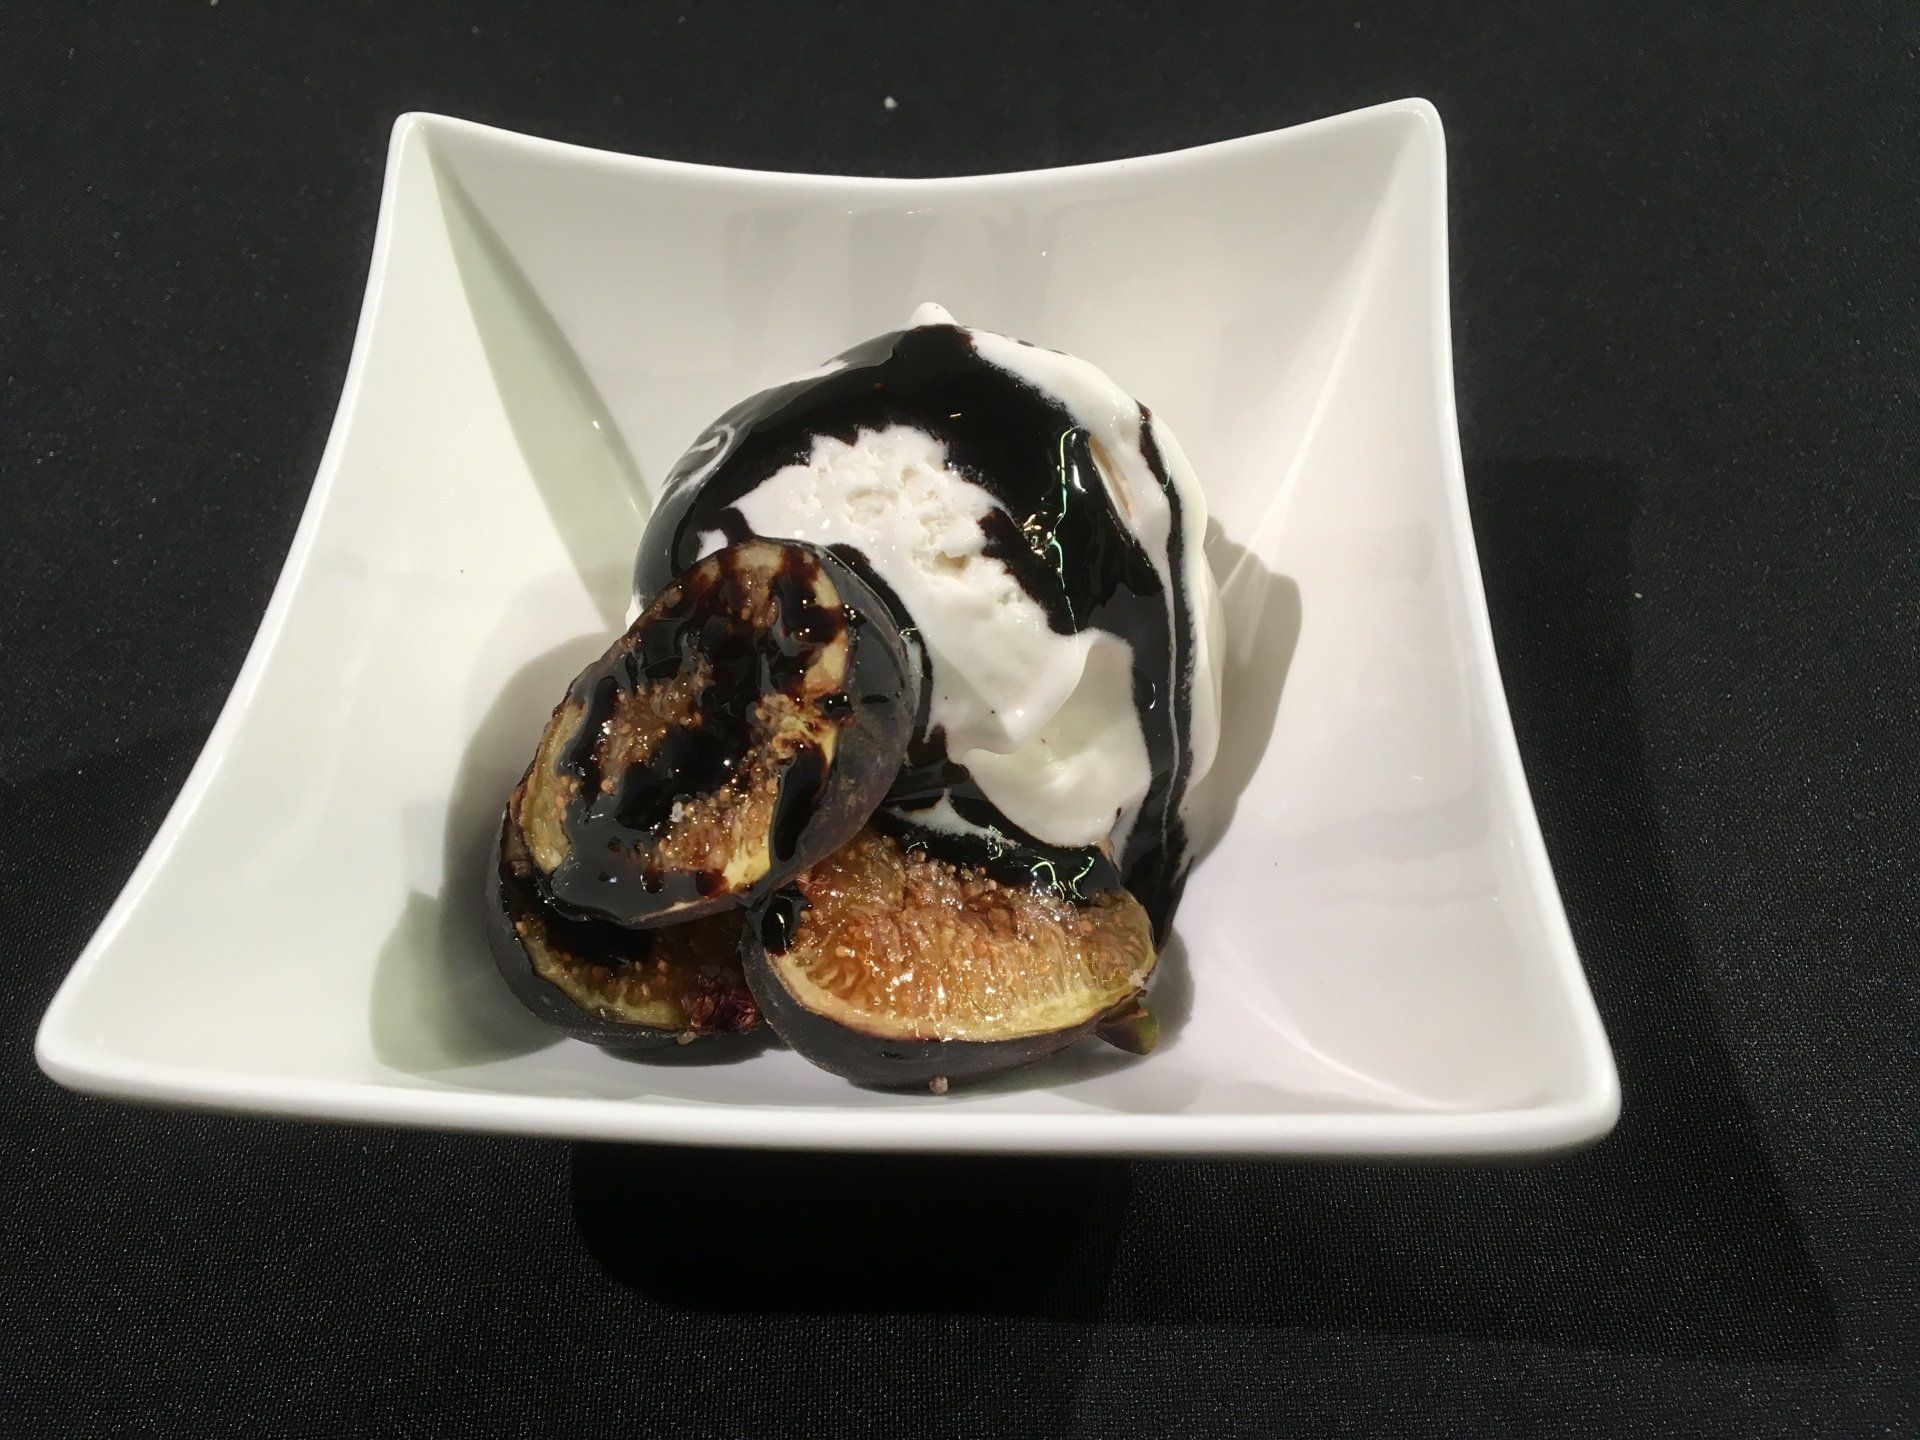 Figs with Vanilla Ice Cream and Aged Balsamic Vinegar